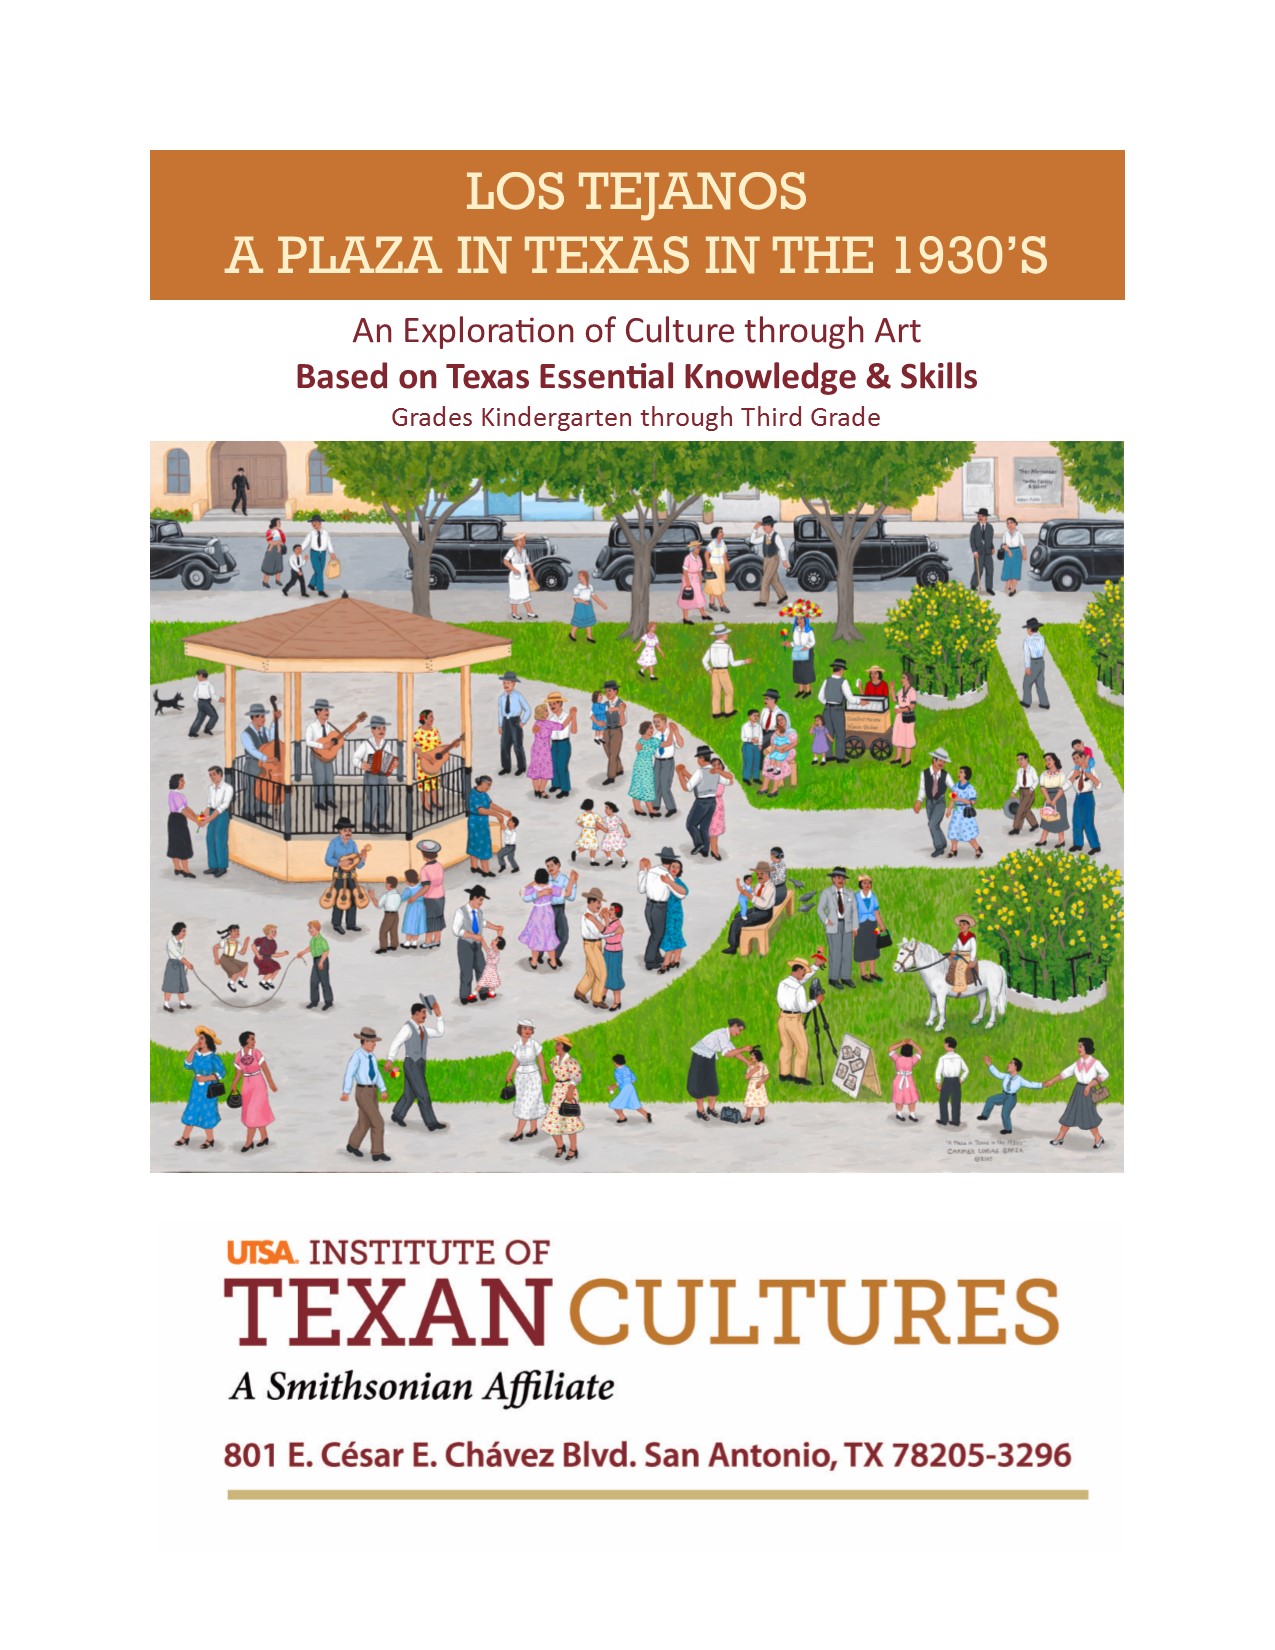 A Plaza in Texas in the 1930s: An Exploration of Culture through Art